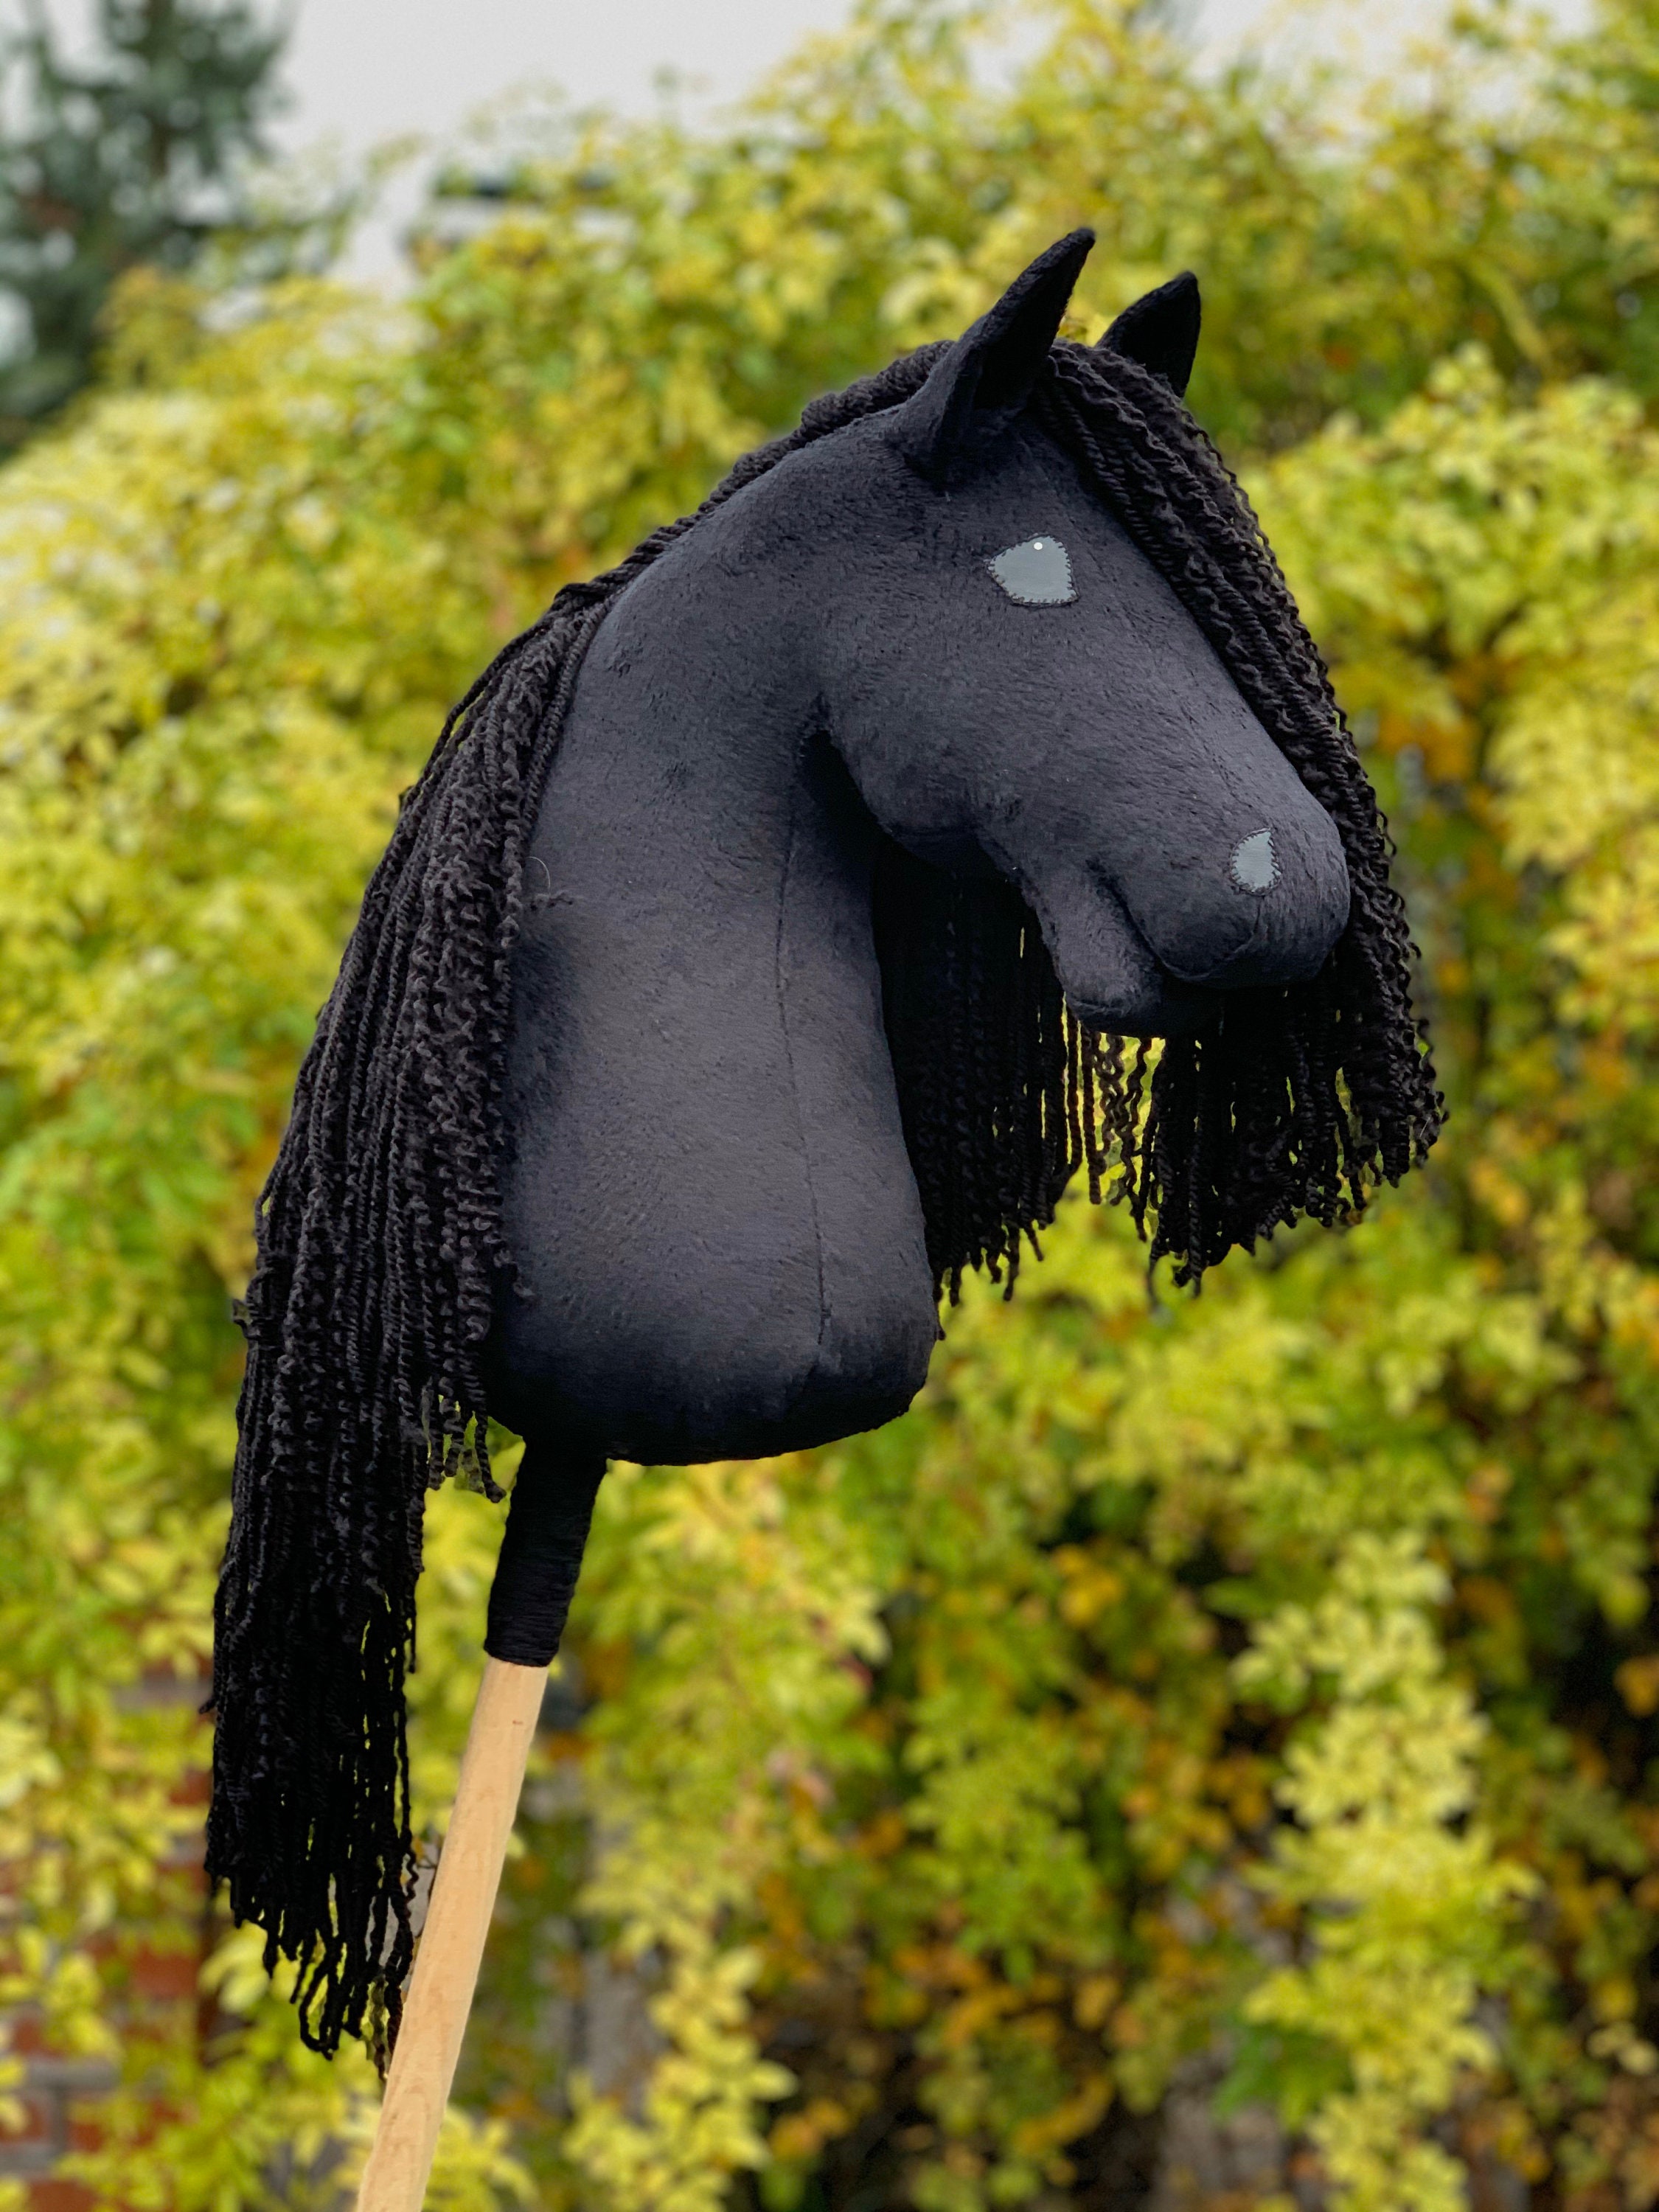 Buy Friesian Hobby Horse hobby Horse With Stick. Good Present for Children  and Teens Online in India 